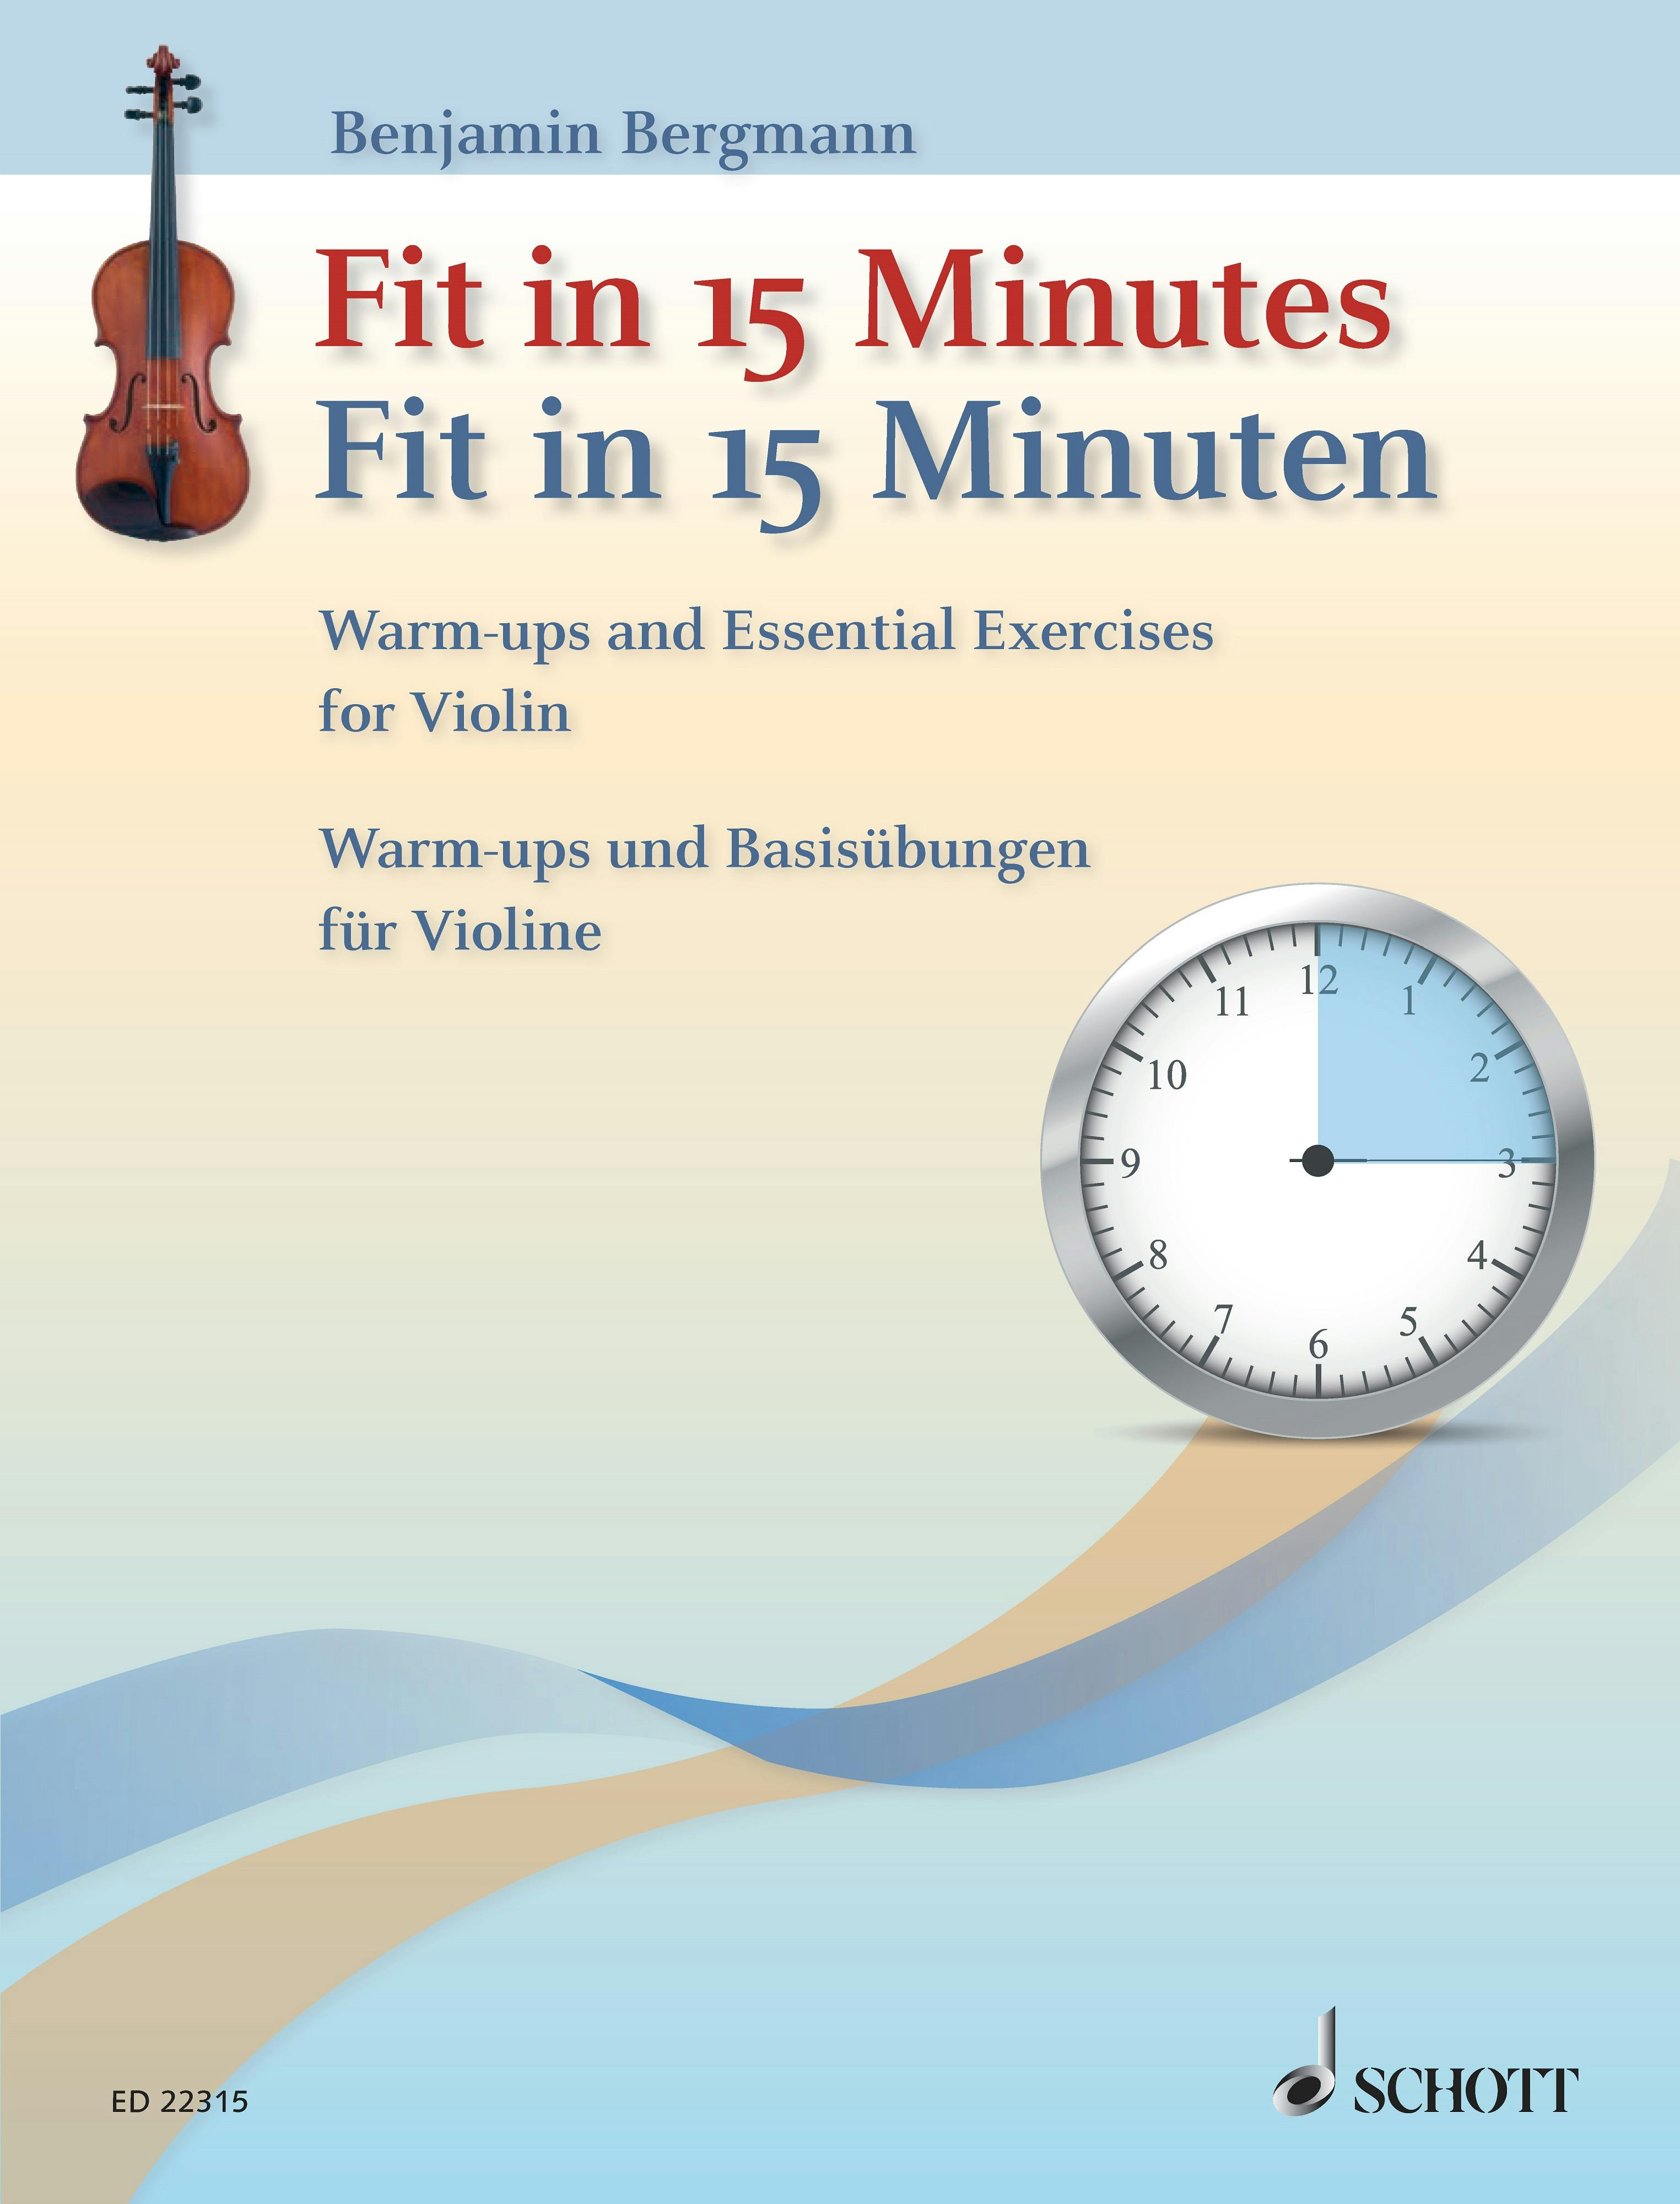 Fit in 15 Minutes: Warm-ups and Essential Exercises for Violin - undefined